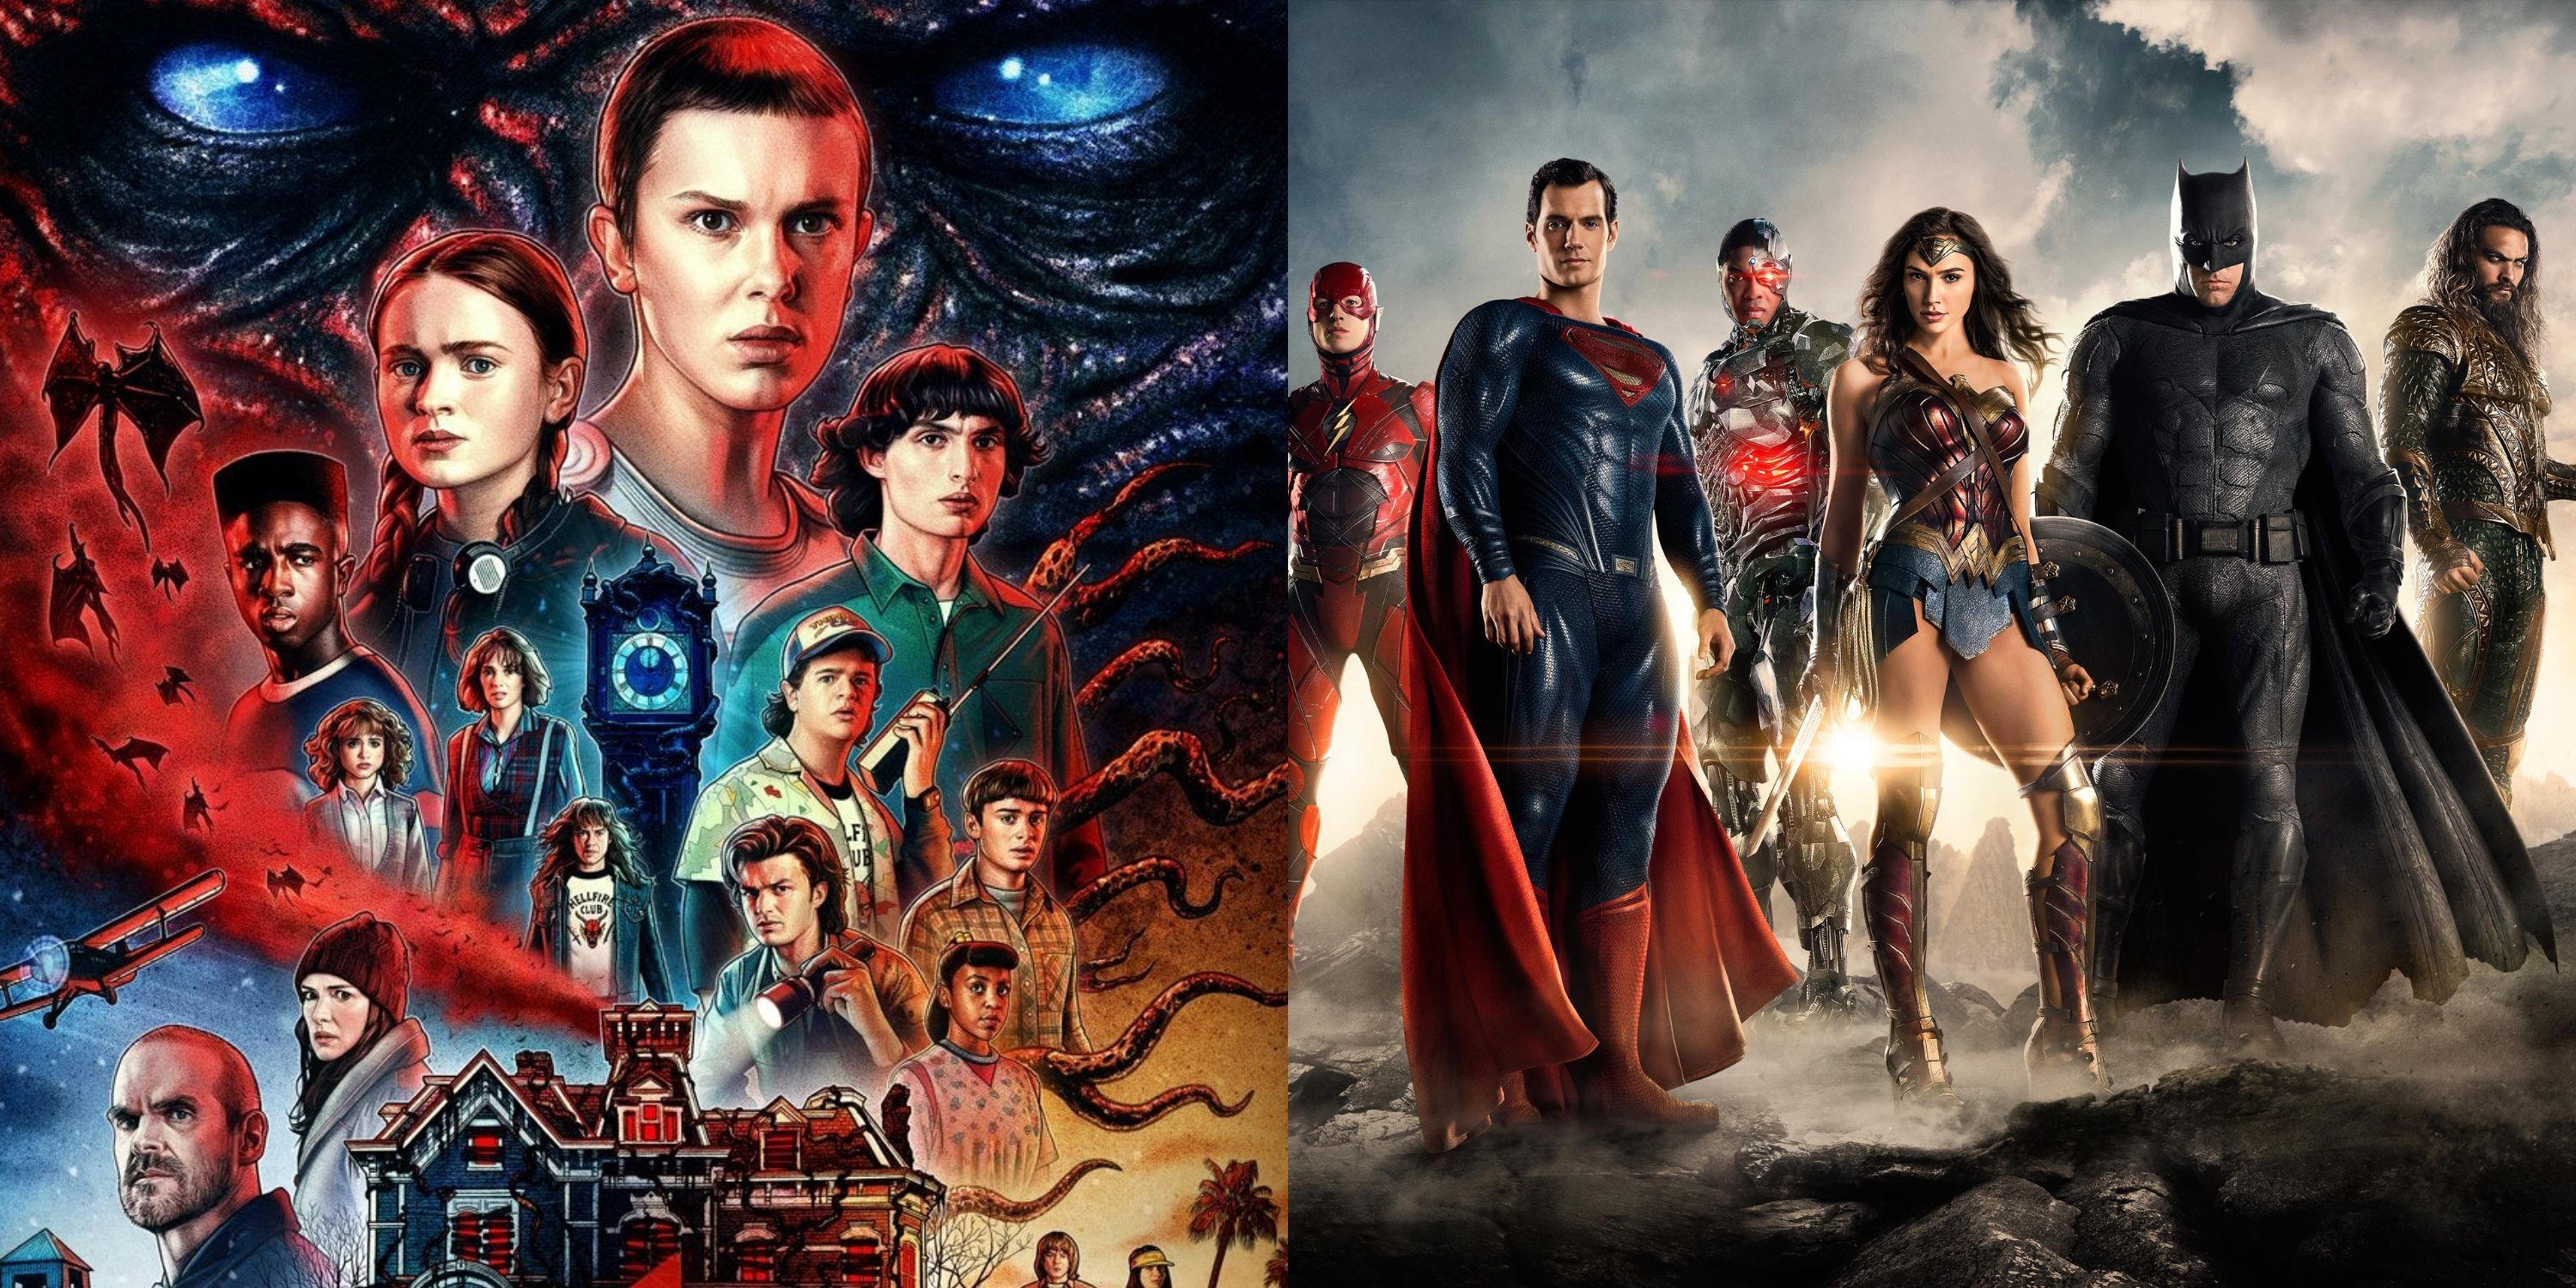 A split image of the characters from Stranger Things & DCEU